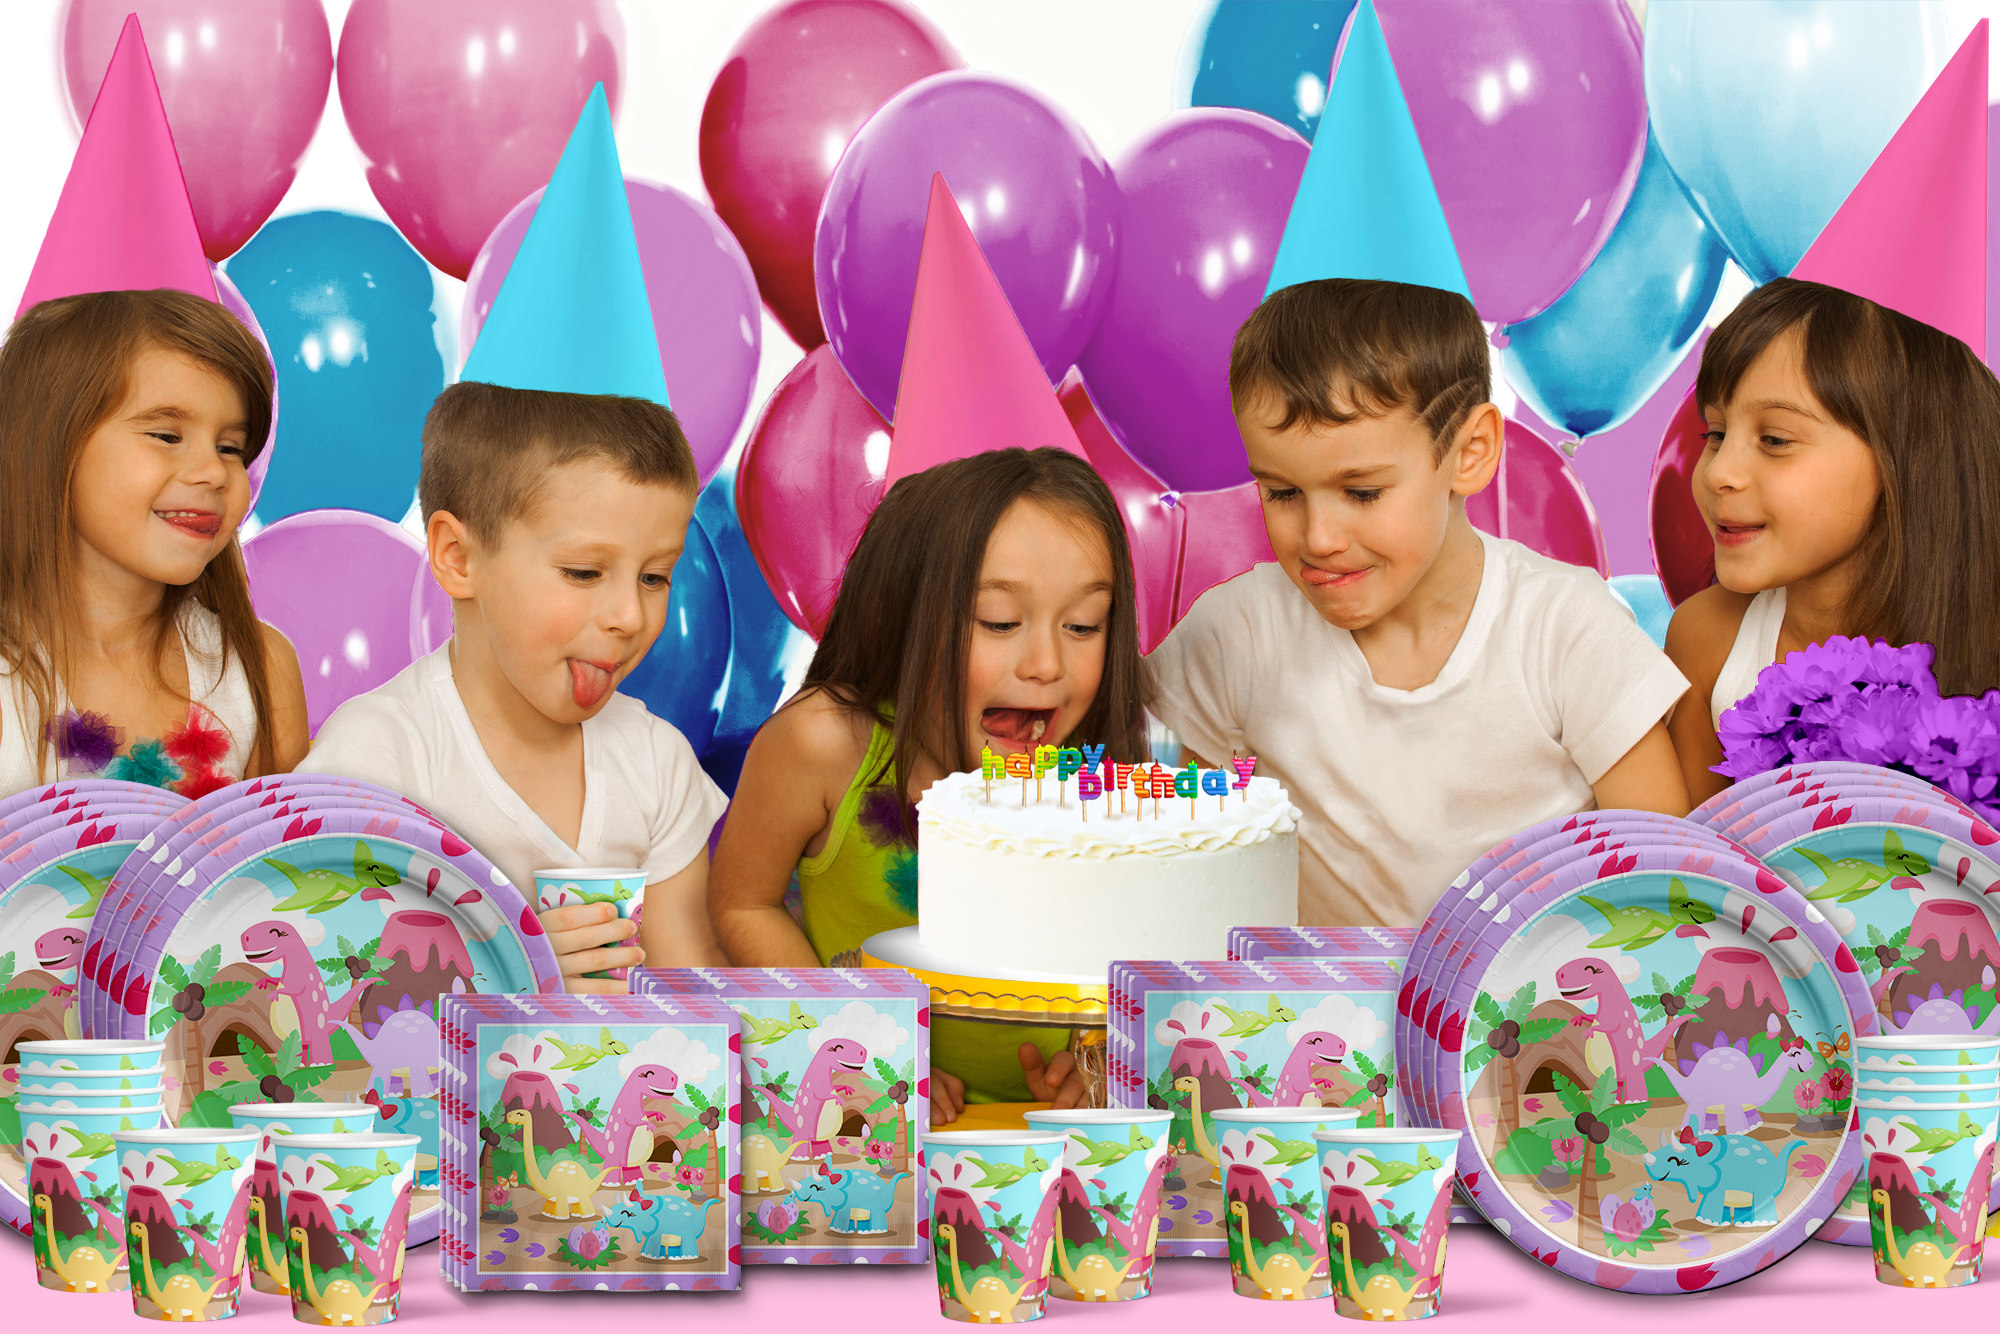 Girl Little Dino Pink Dinosaur Birthday Party Tableware Kit For 16 Guests - BirthdayGalore.com